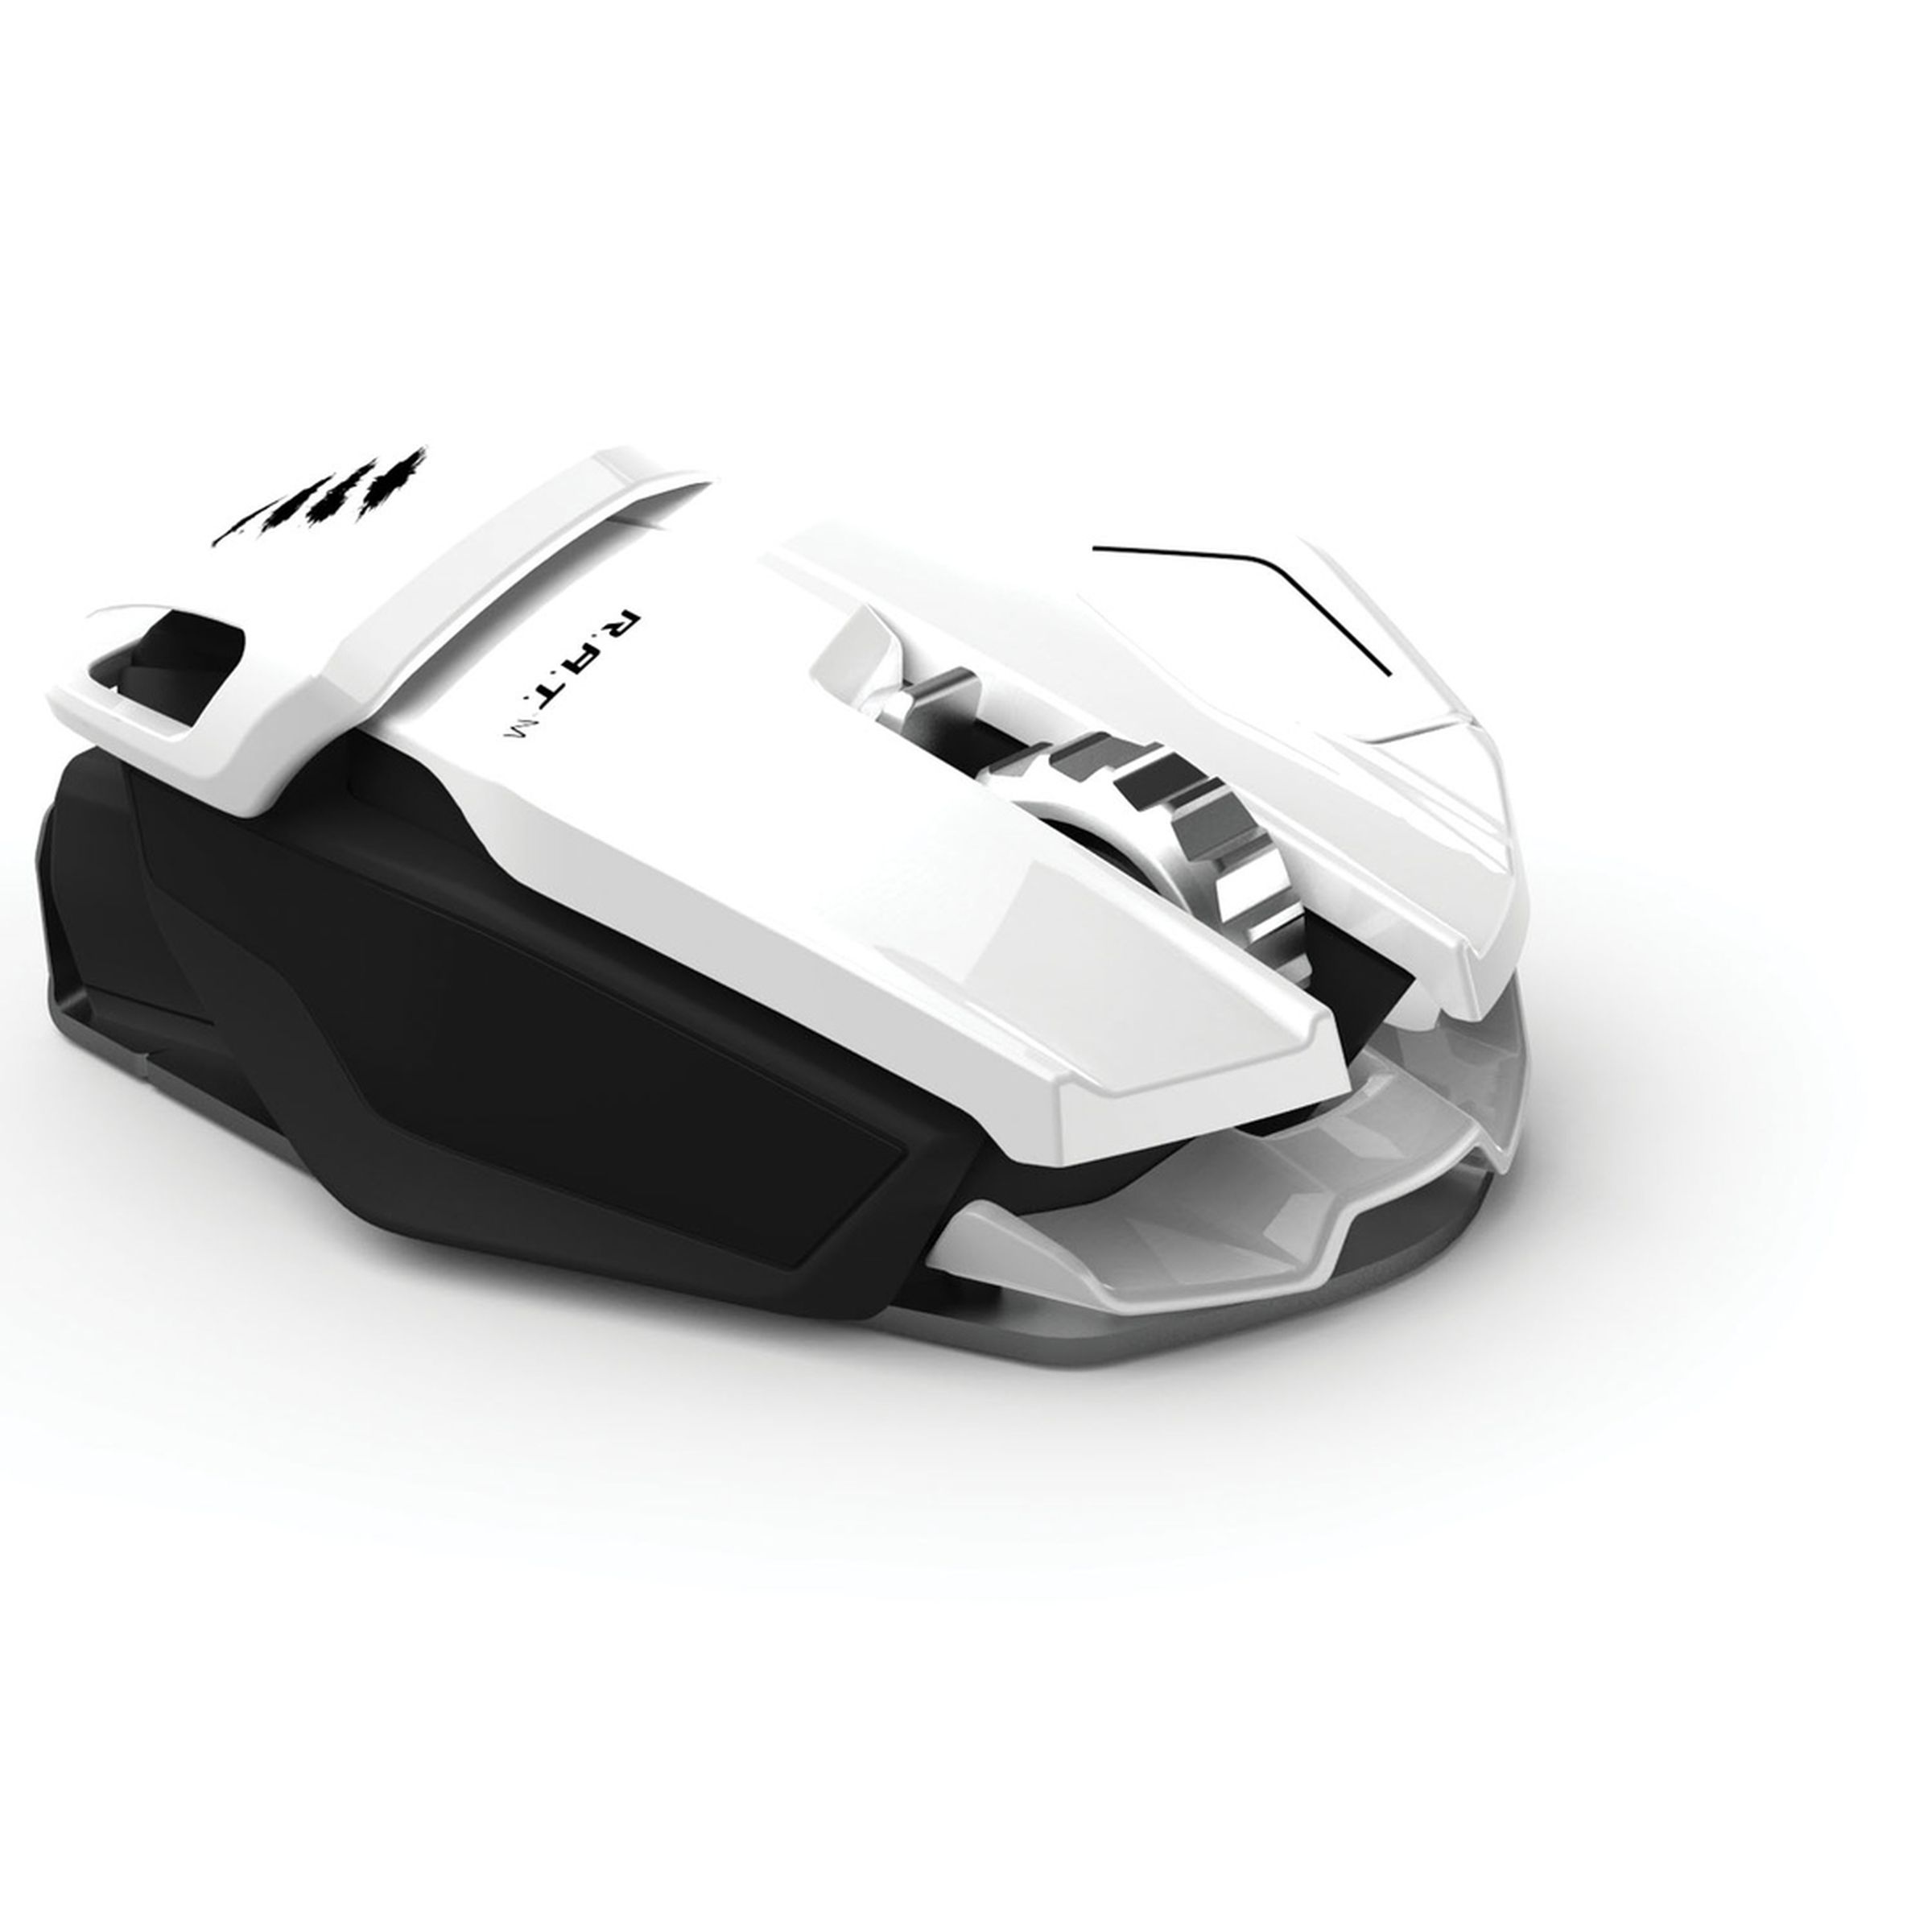 MadCatz R.A.T.M, M.O.U.S.9, F.R.E.Q.M, C.N.T.R.L.R press images